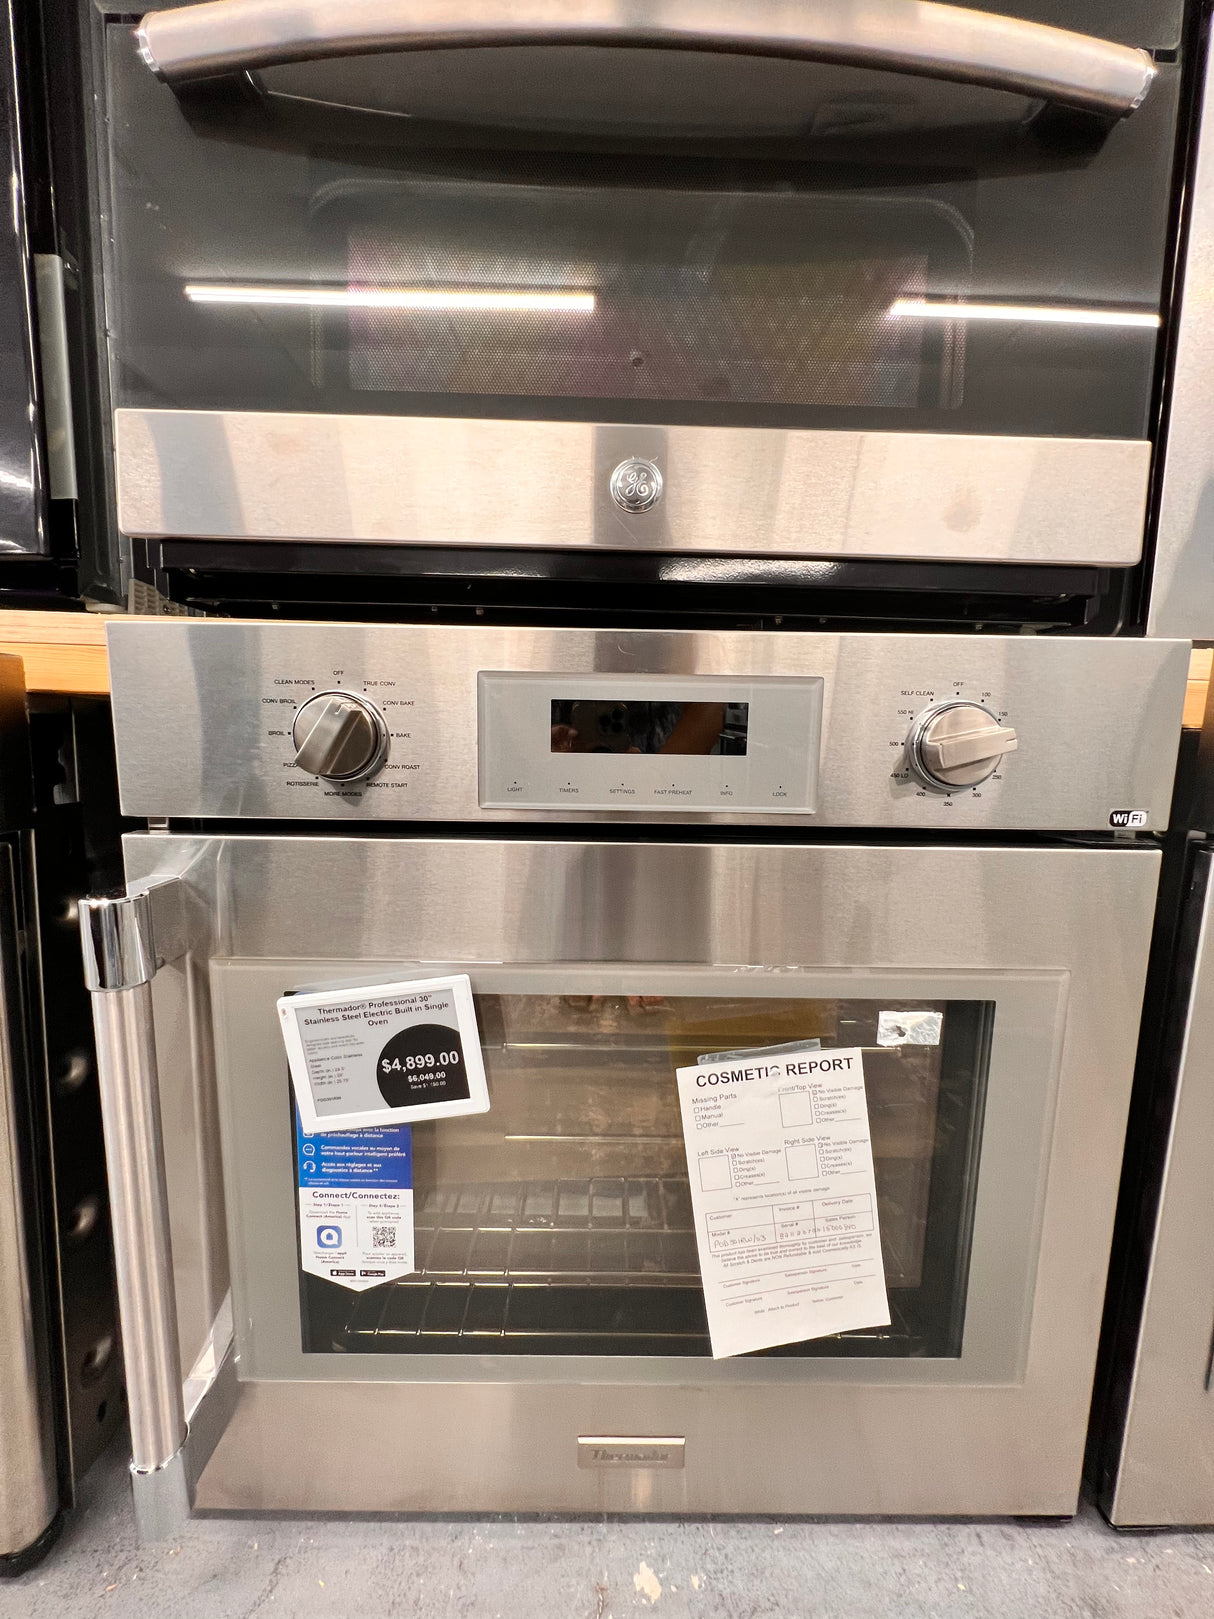 Thermador, professional 30 inch stainless steel electric built-in single oven. POD301RW.